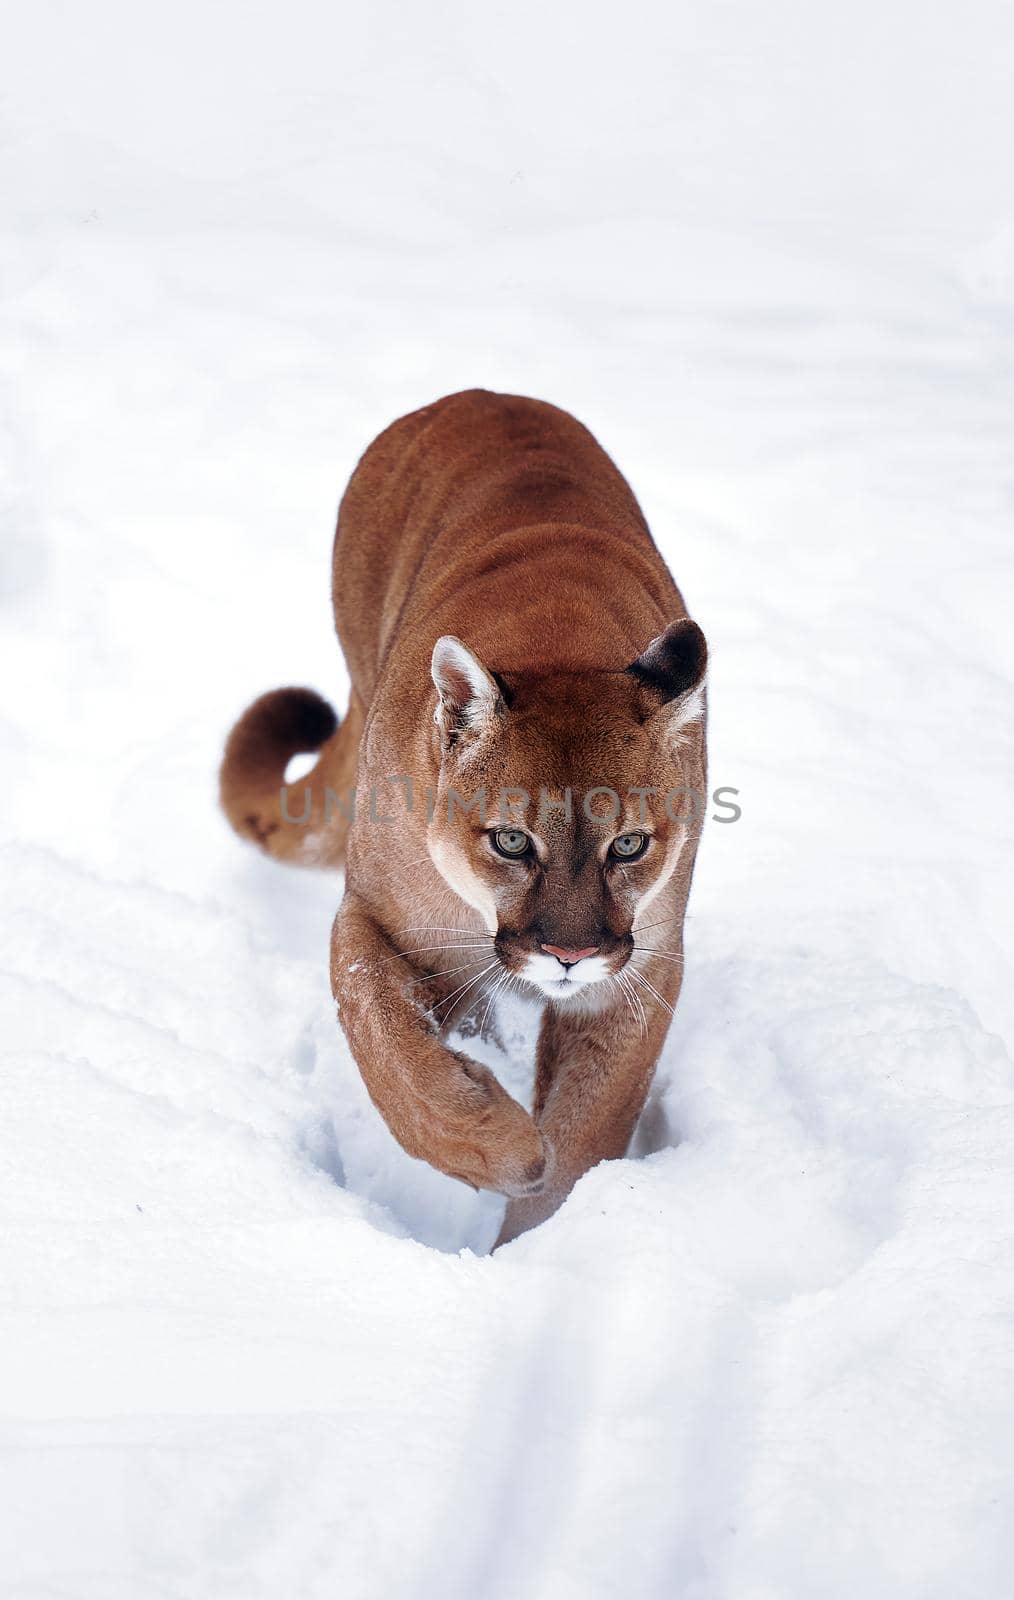 Puma in the winter woods, Mountain Lion look. Mountain lion hunts in a snowy forest. Wild cat on snow. Eyes of a predator stalking prey. Portrait of a big cat by EvgeniyQW